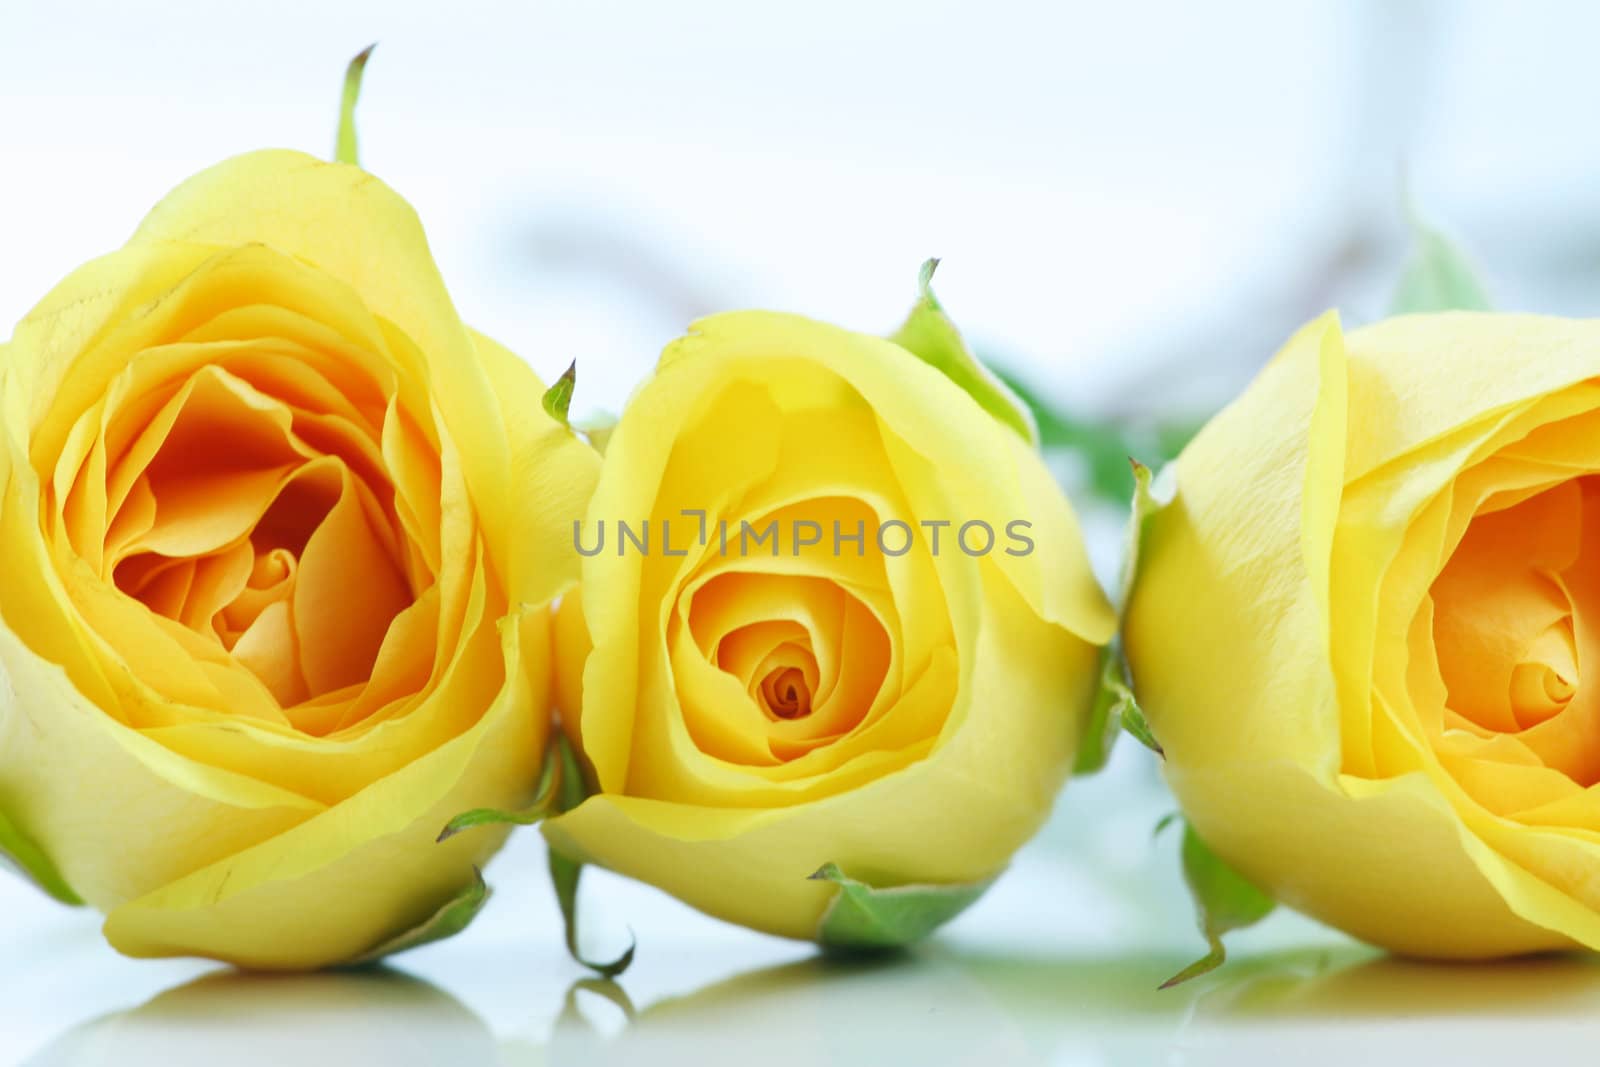 THree beautiful yellow roses lined next to each other, on white.